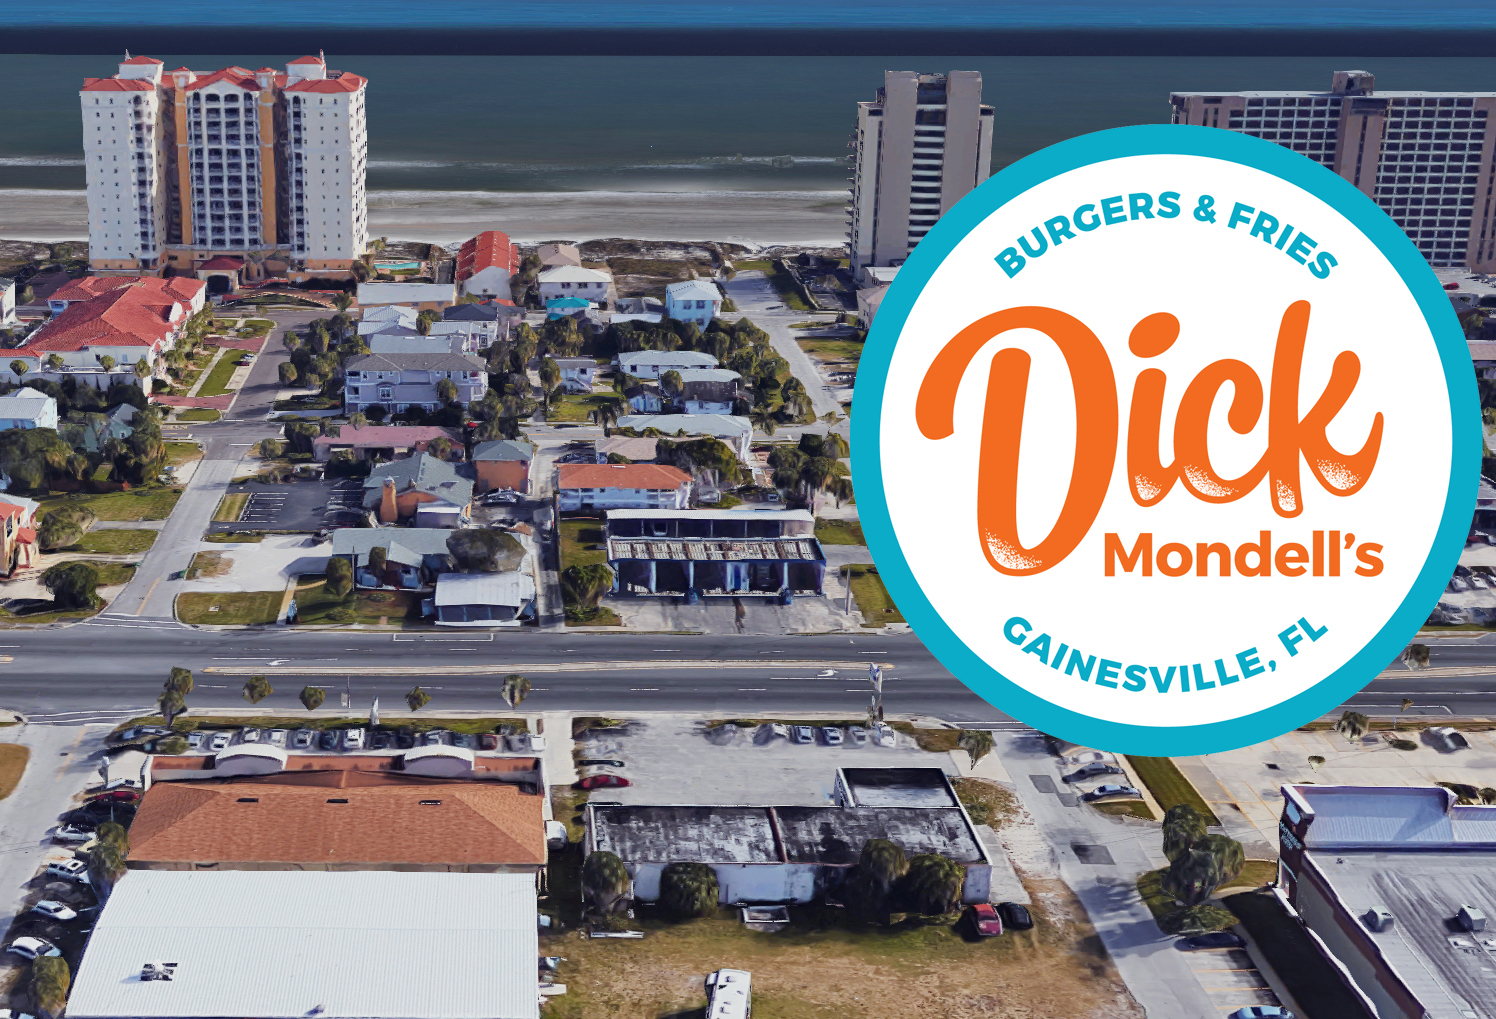 Dick Mondell’s Burgers & Fries plans to invest $1 million to build its second restaurant at 1177 Third St. in Jacksonville Beach.